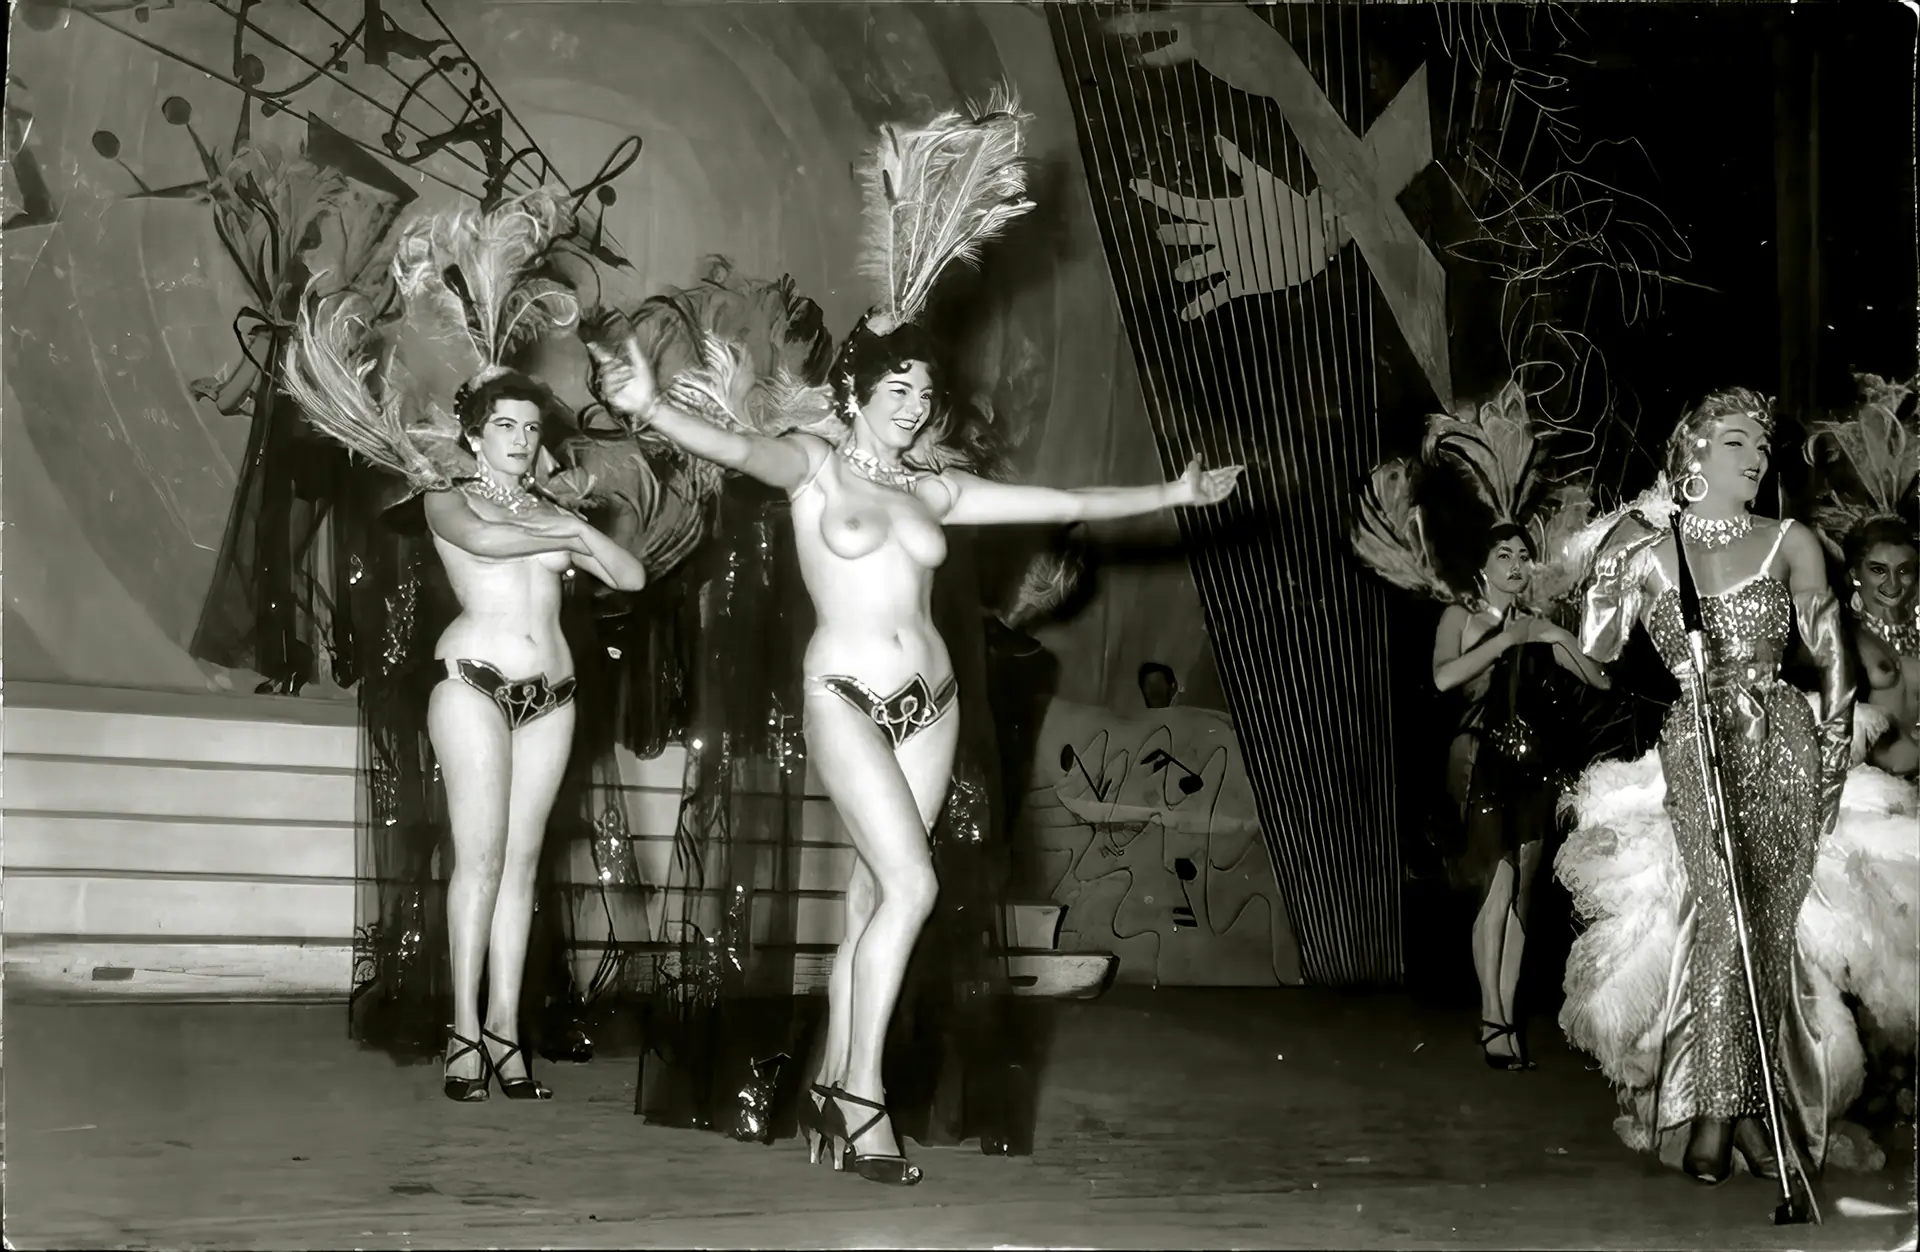 Topless vintage burlesque babes dance while a blonde sings